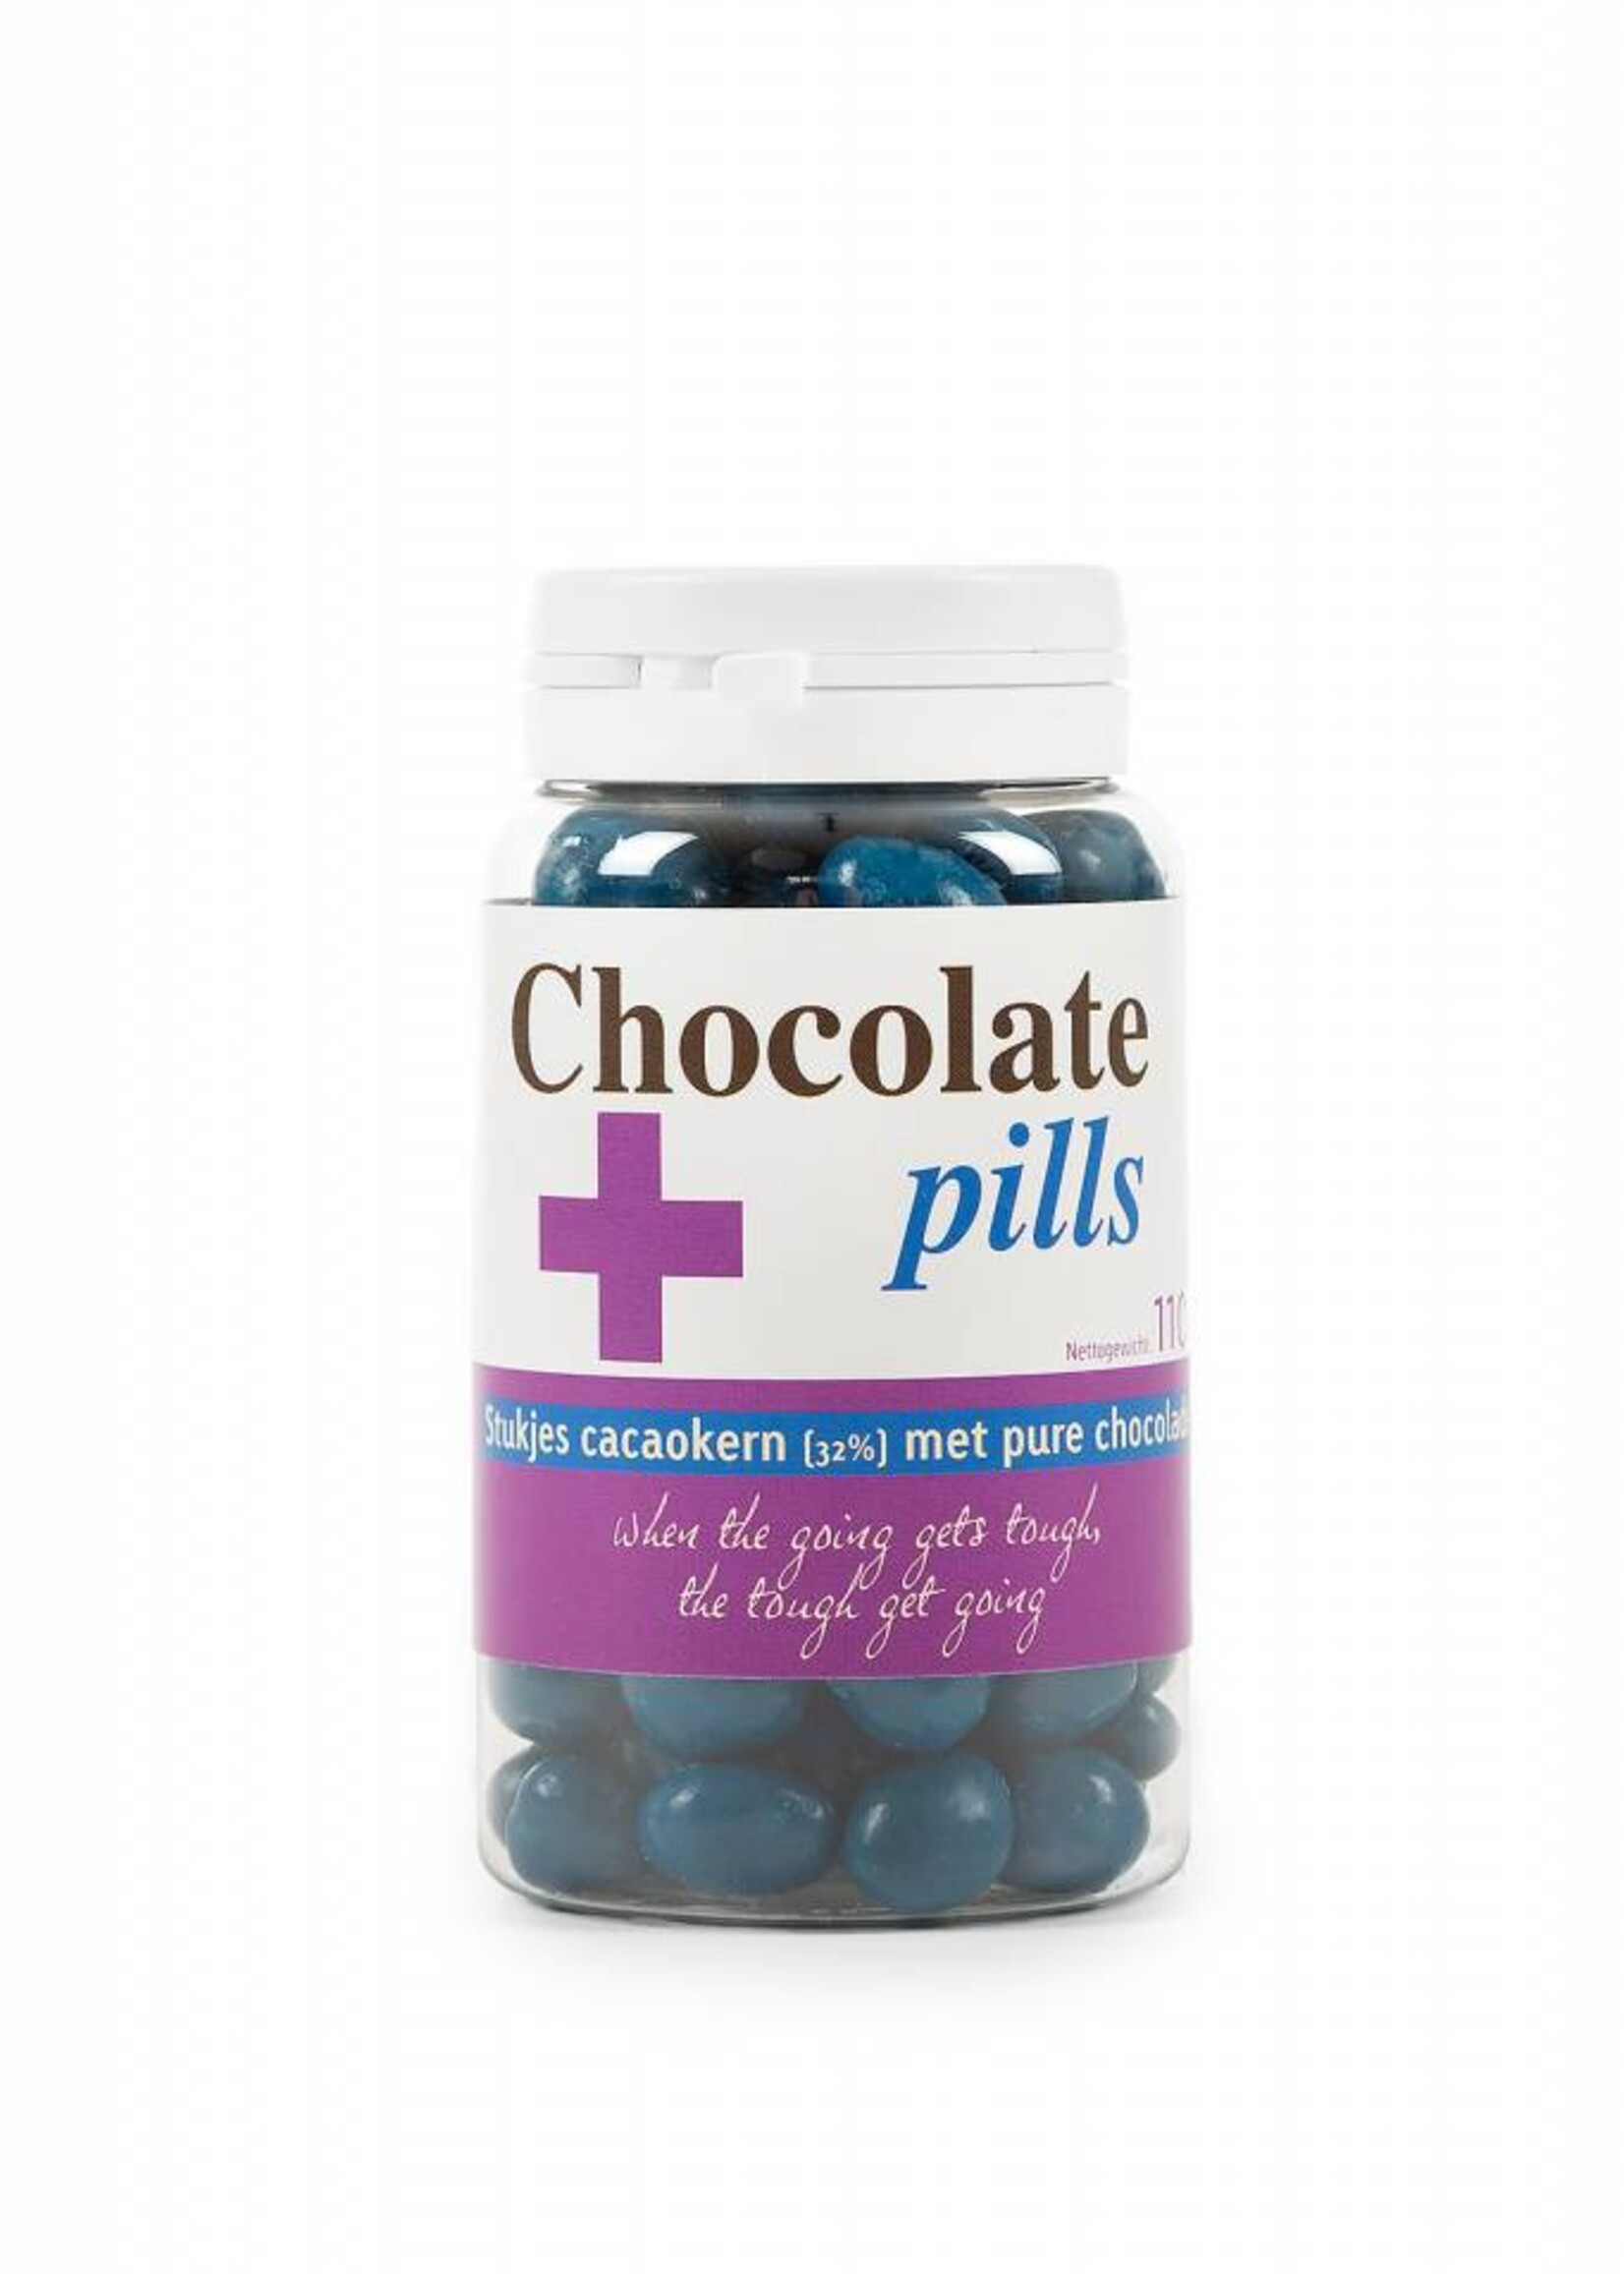 Chocolate pills with cocoa nibs